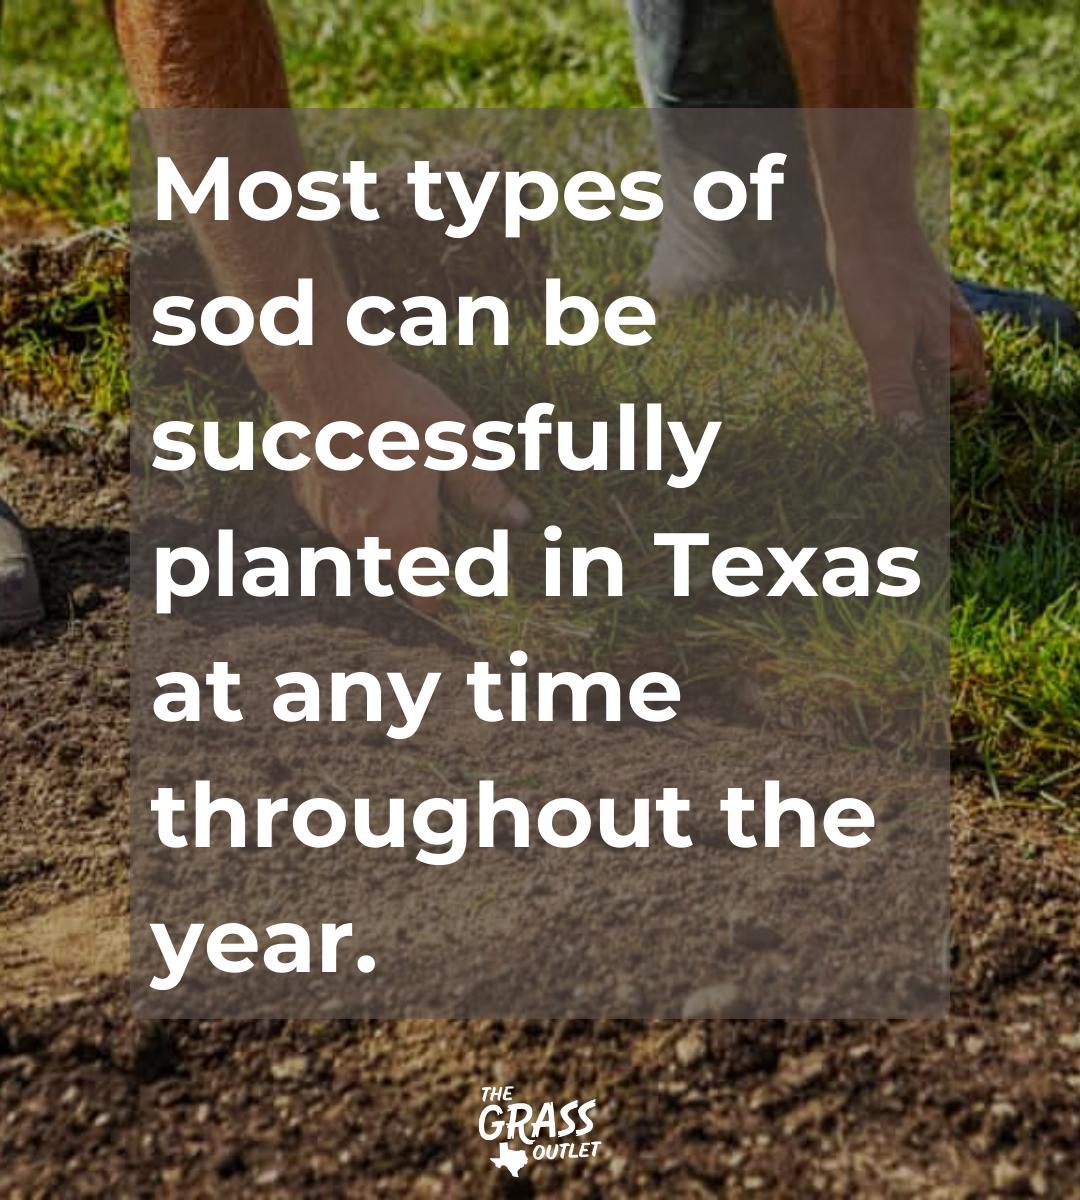 Recommendation when is the great time to lay sod in Texas